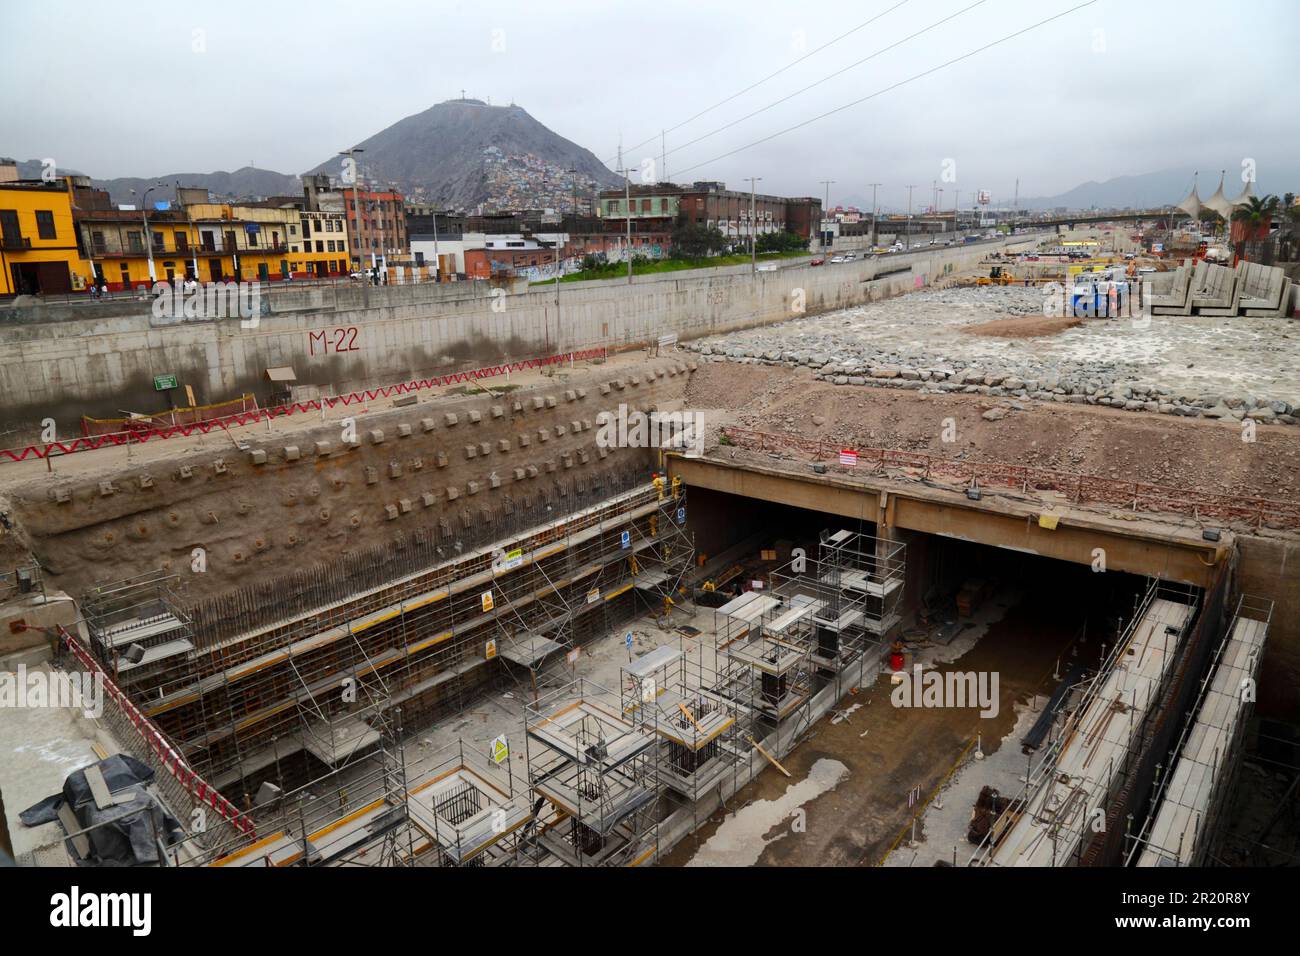 Construction site of tunnel under the River Rimac for a new motorway and Yellow Line Via Expresa bus route, Lima, Peru. The tunnel runs for 1.8km under the River Rimac, which was diverted to allow construction to take place. Works started in January 2012 and took 6 years, the tunnel opened in June 2018. The Brazilian company OAS built the tunnel. The conical hill in the background is Cerro San Cristobal. Stock Photo